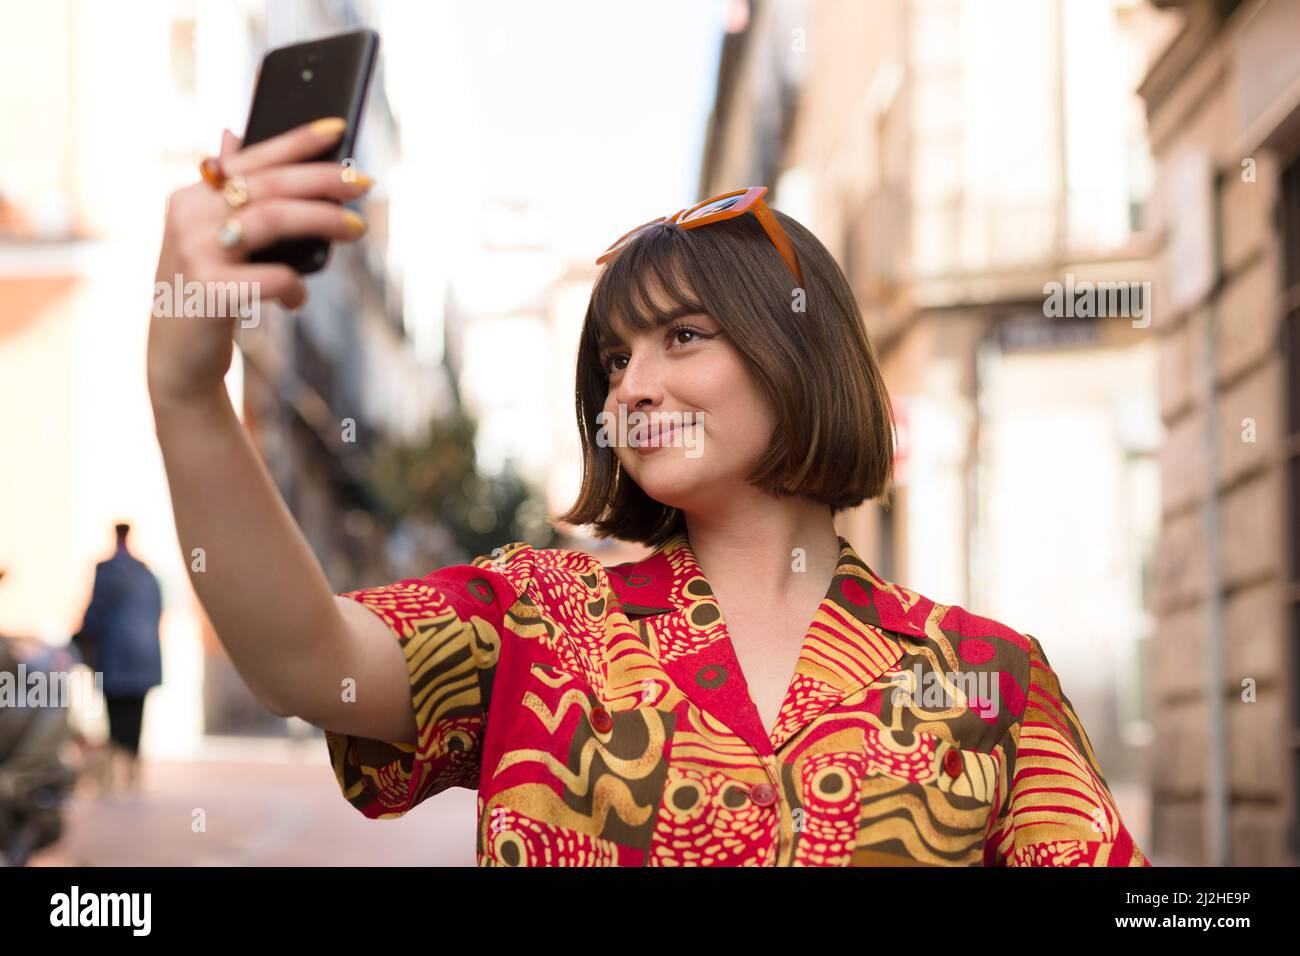 Smiling young caucasian woman with short hair taking a photo of herself with a mobile phone outdoors. Stock Photo